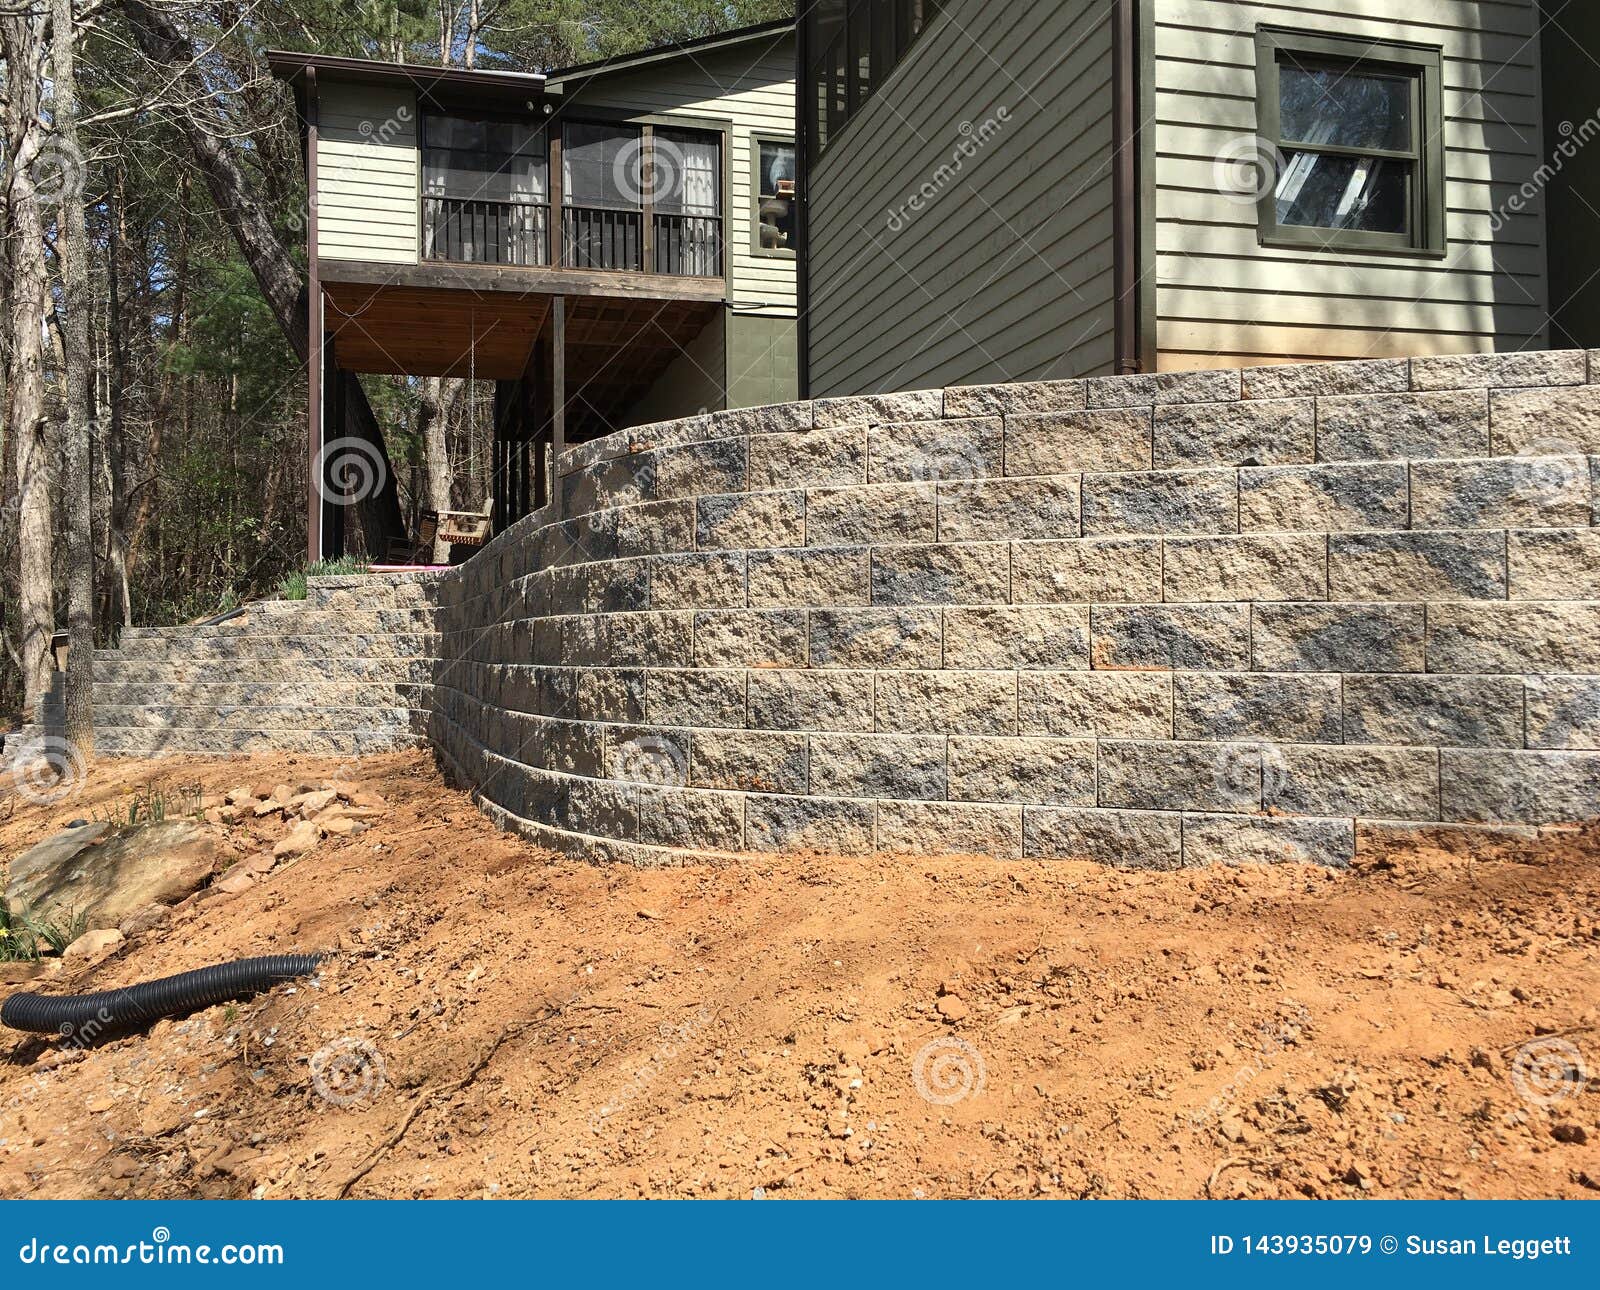 building a retaining wall on the back of a house